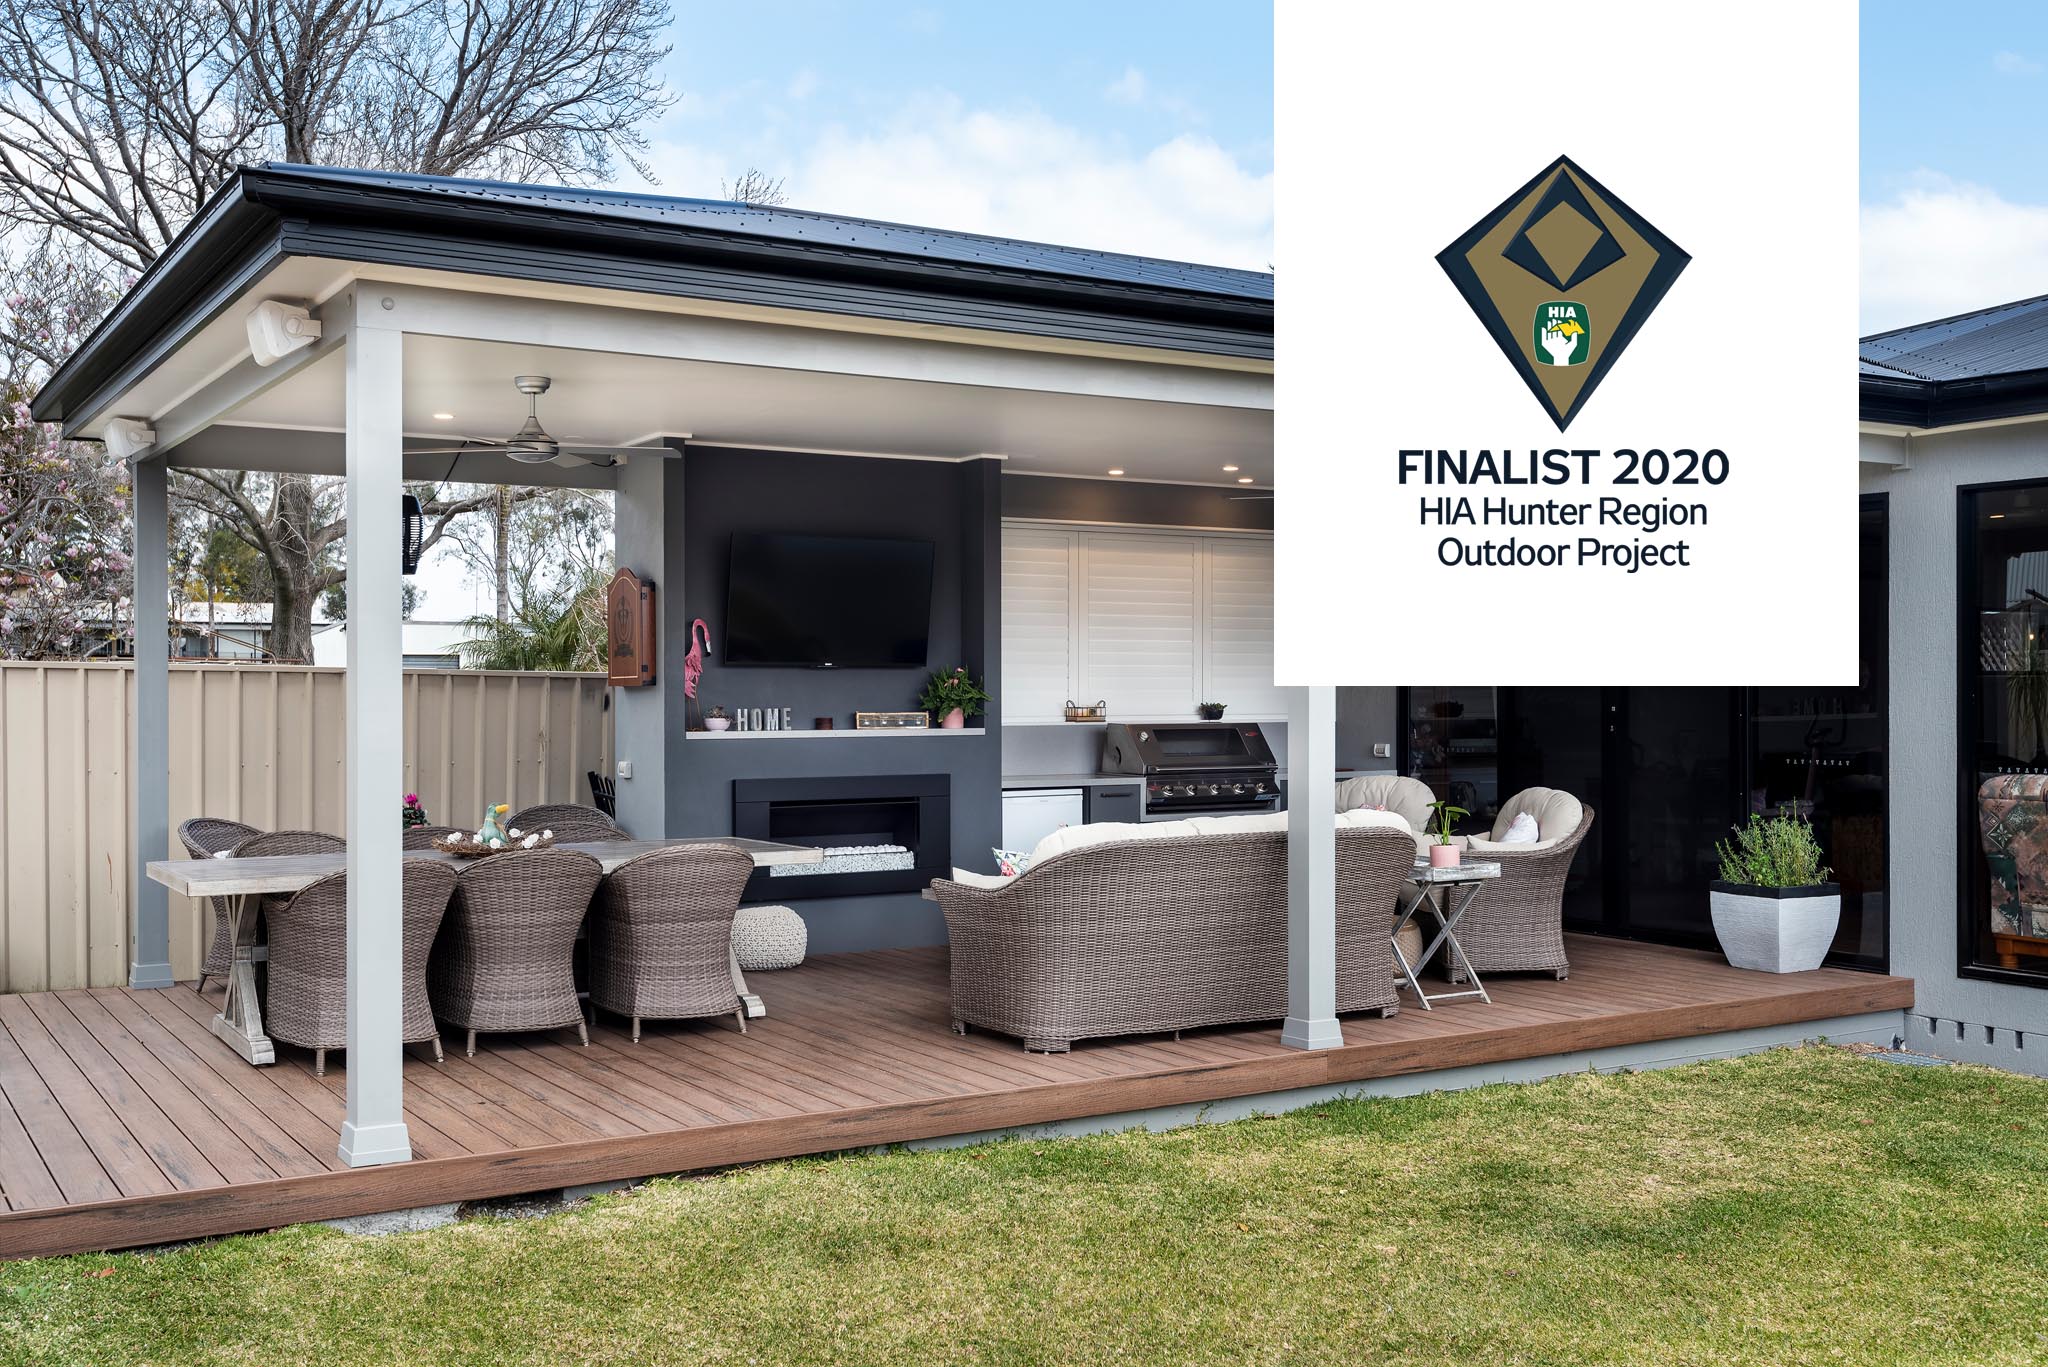 finalist-image-and-logo-2020-outdoor